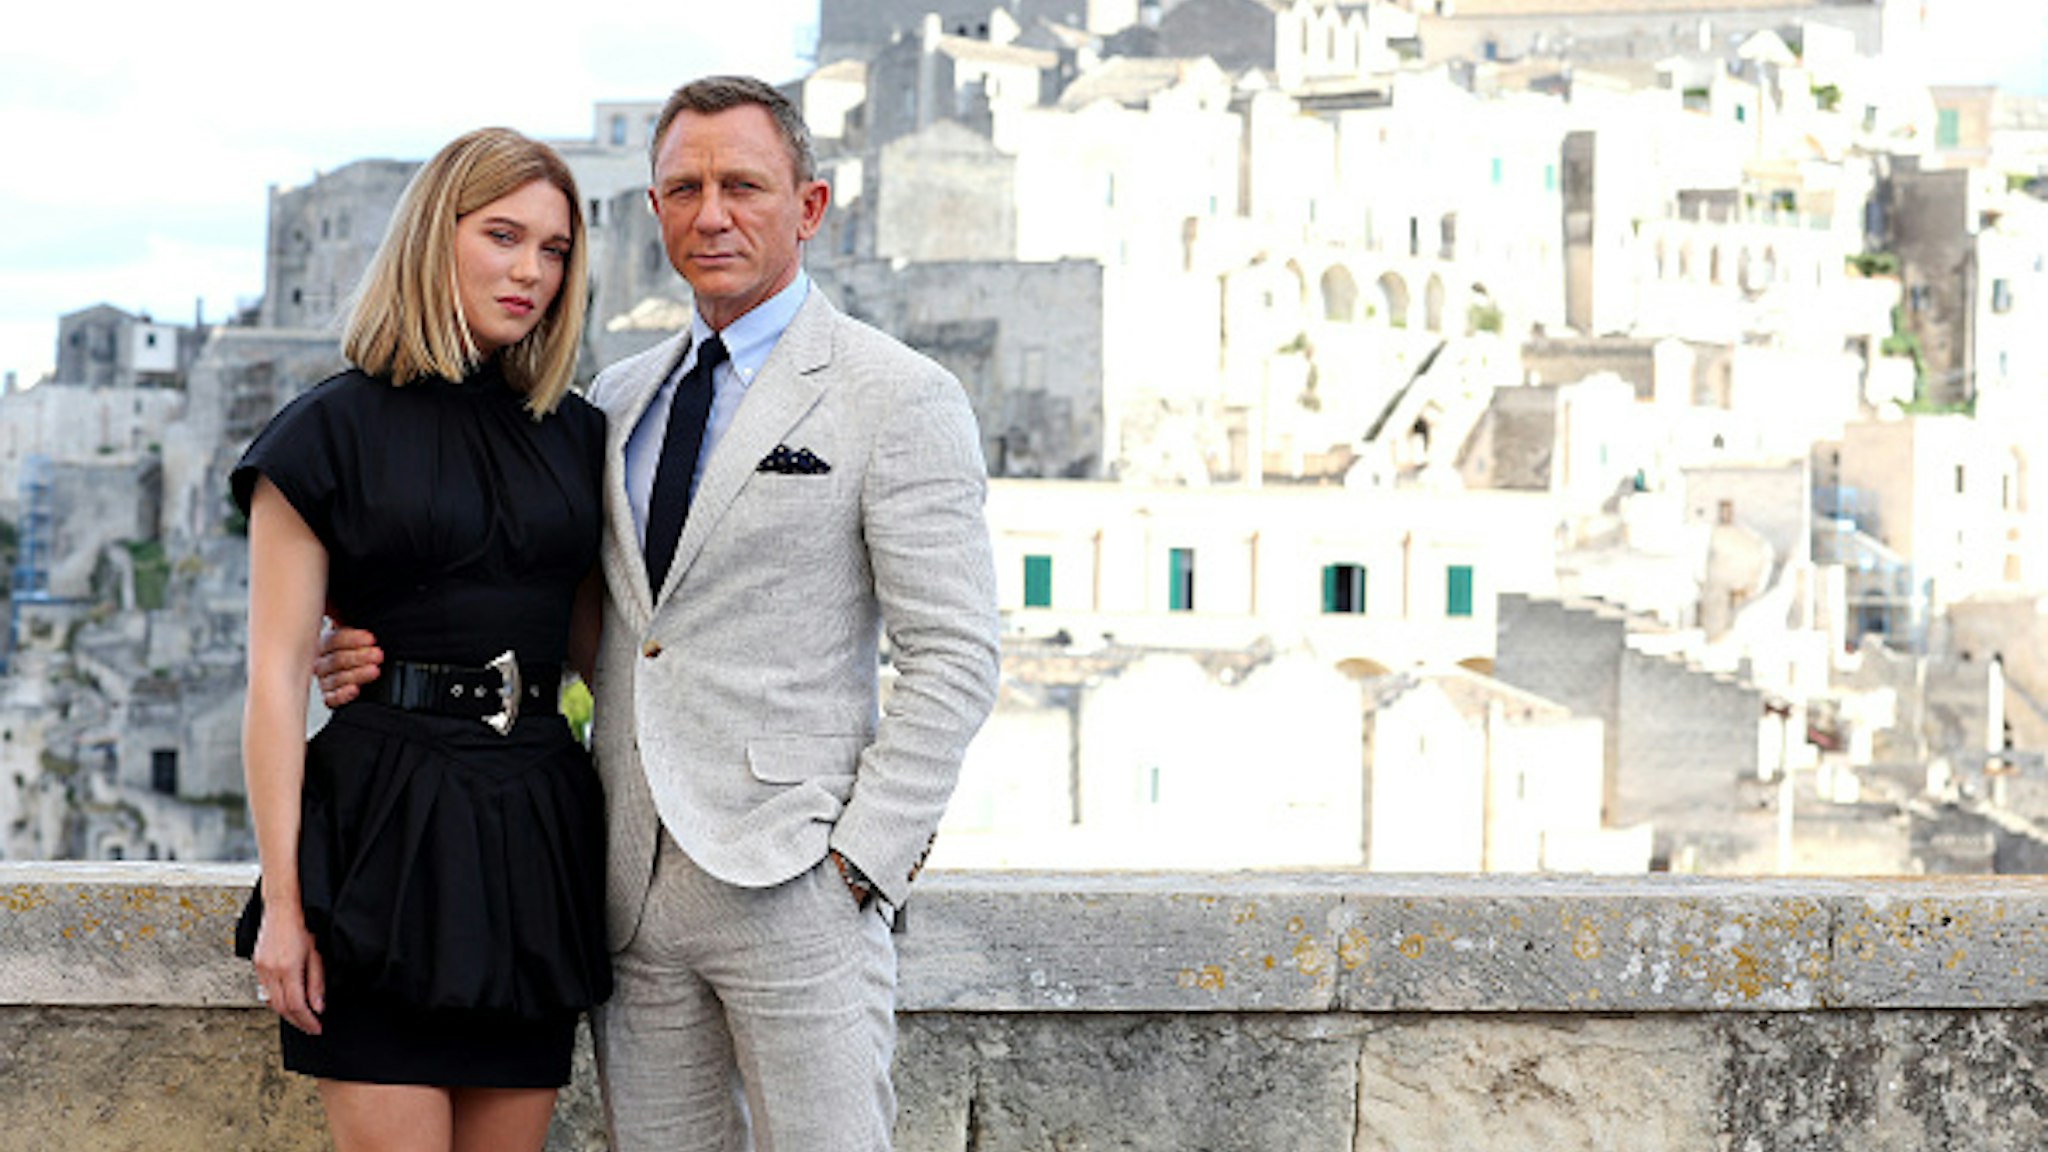 MATERA, ITALY - SEPTEMBER 09: Actress Léa Seydoux and actor Daniel Craig pose as they arrive on set of the James Bond last movie "No Time To Die" on September 09, 2019 in Matera, Italy.